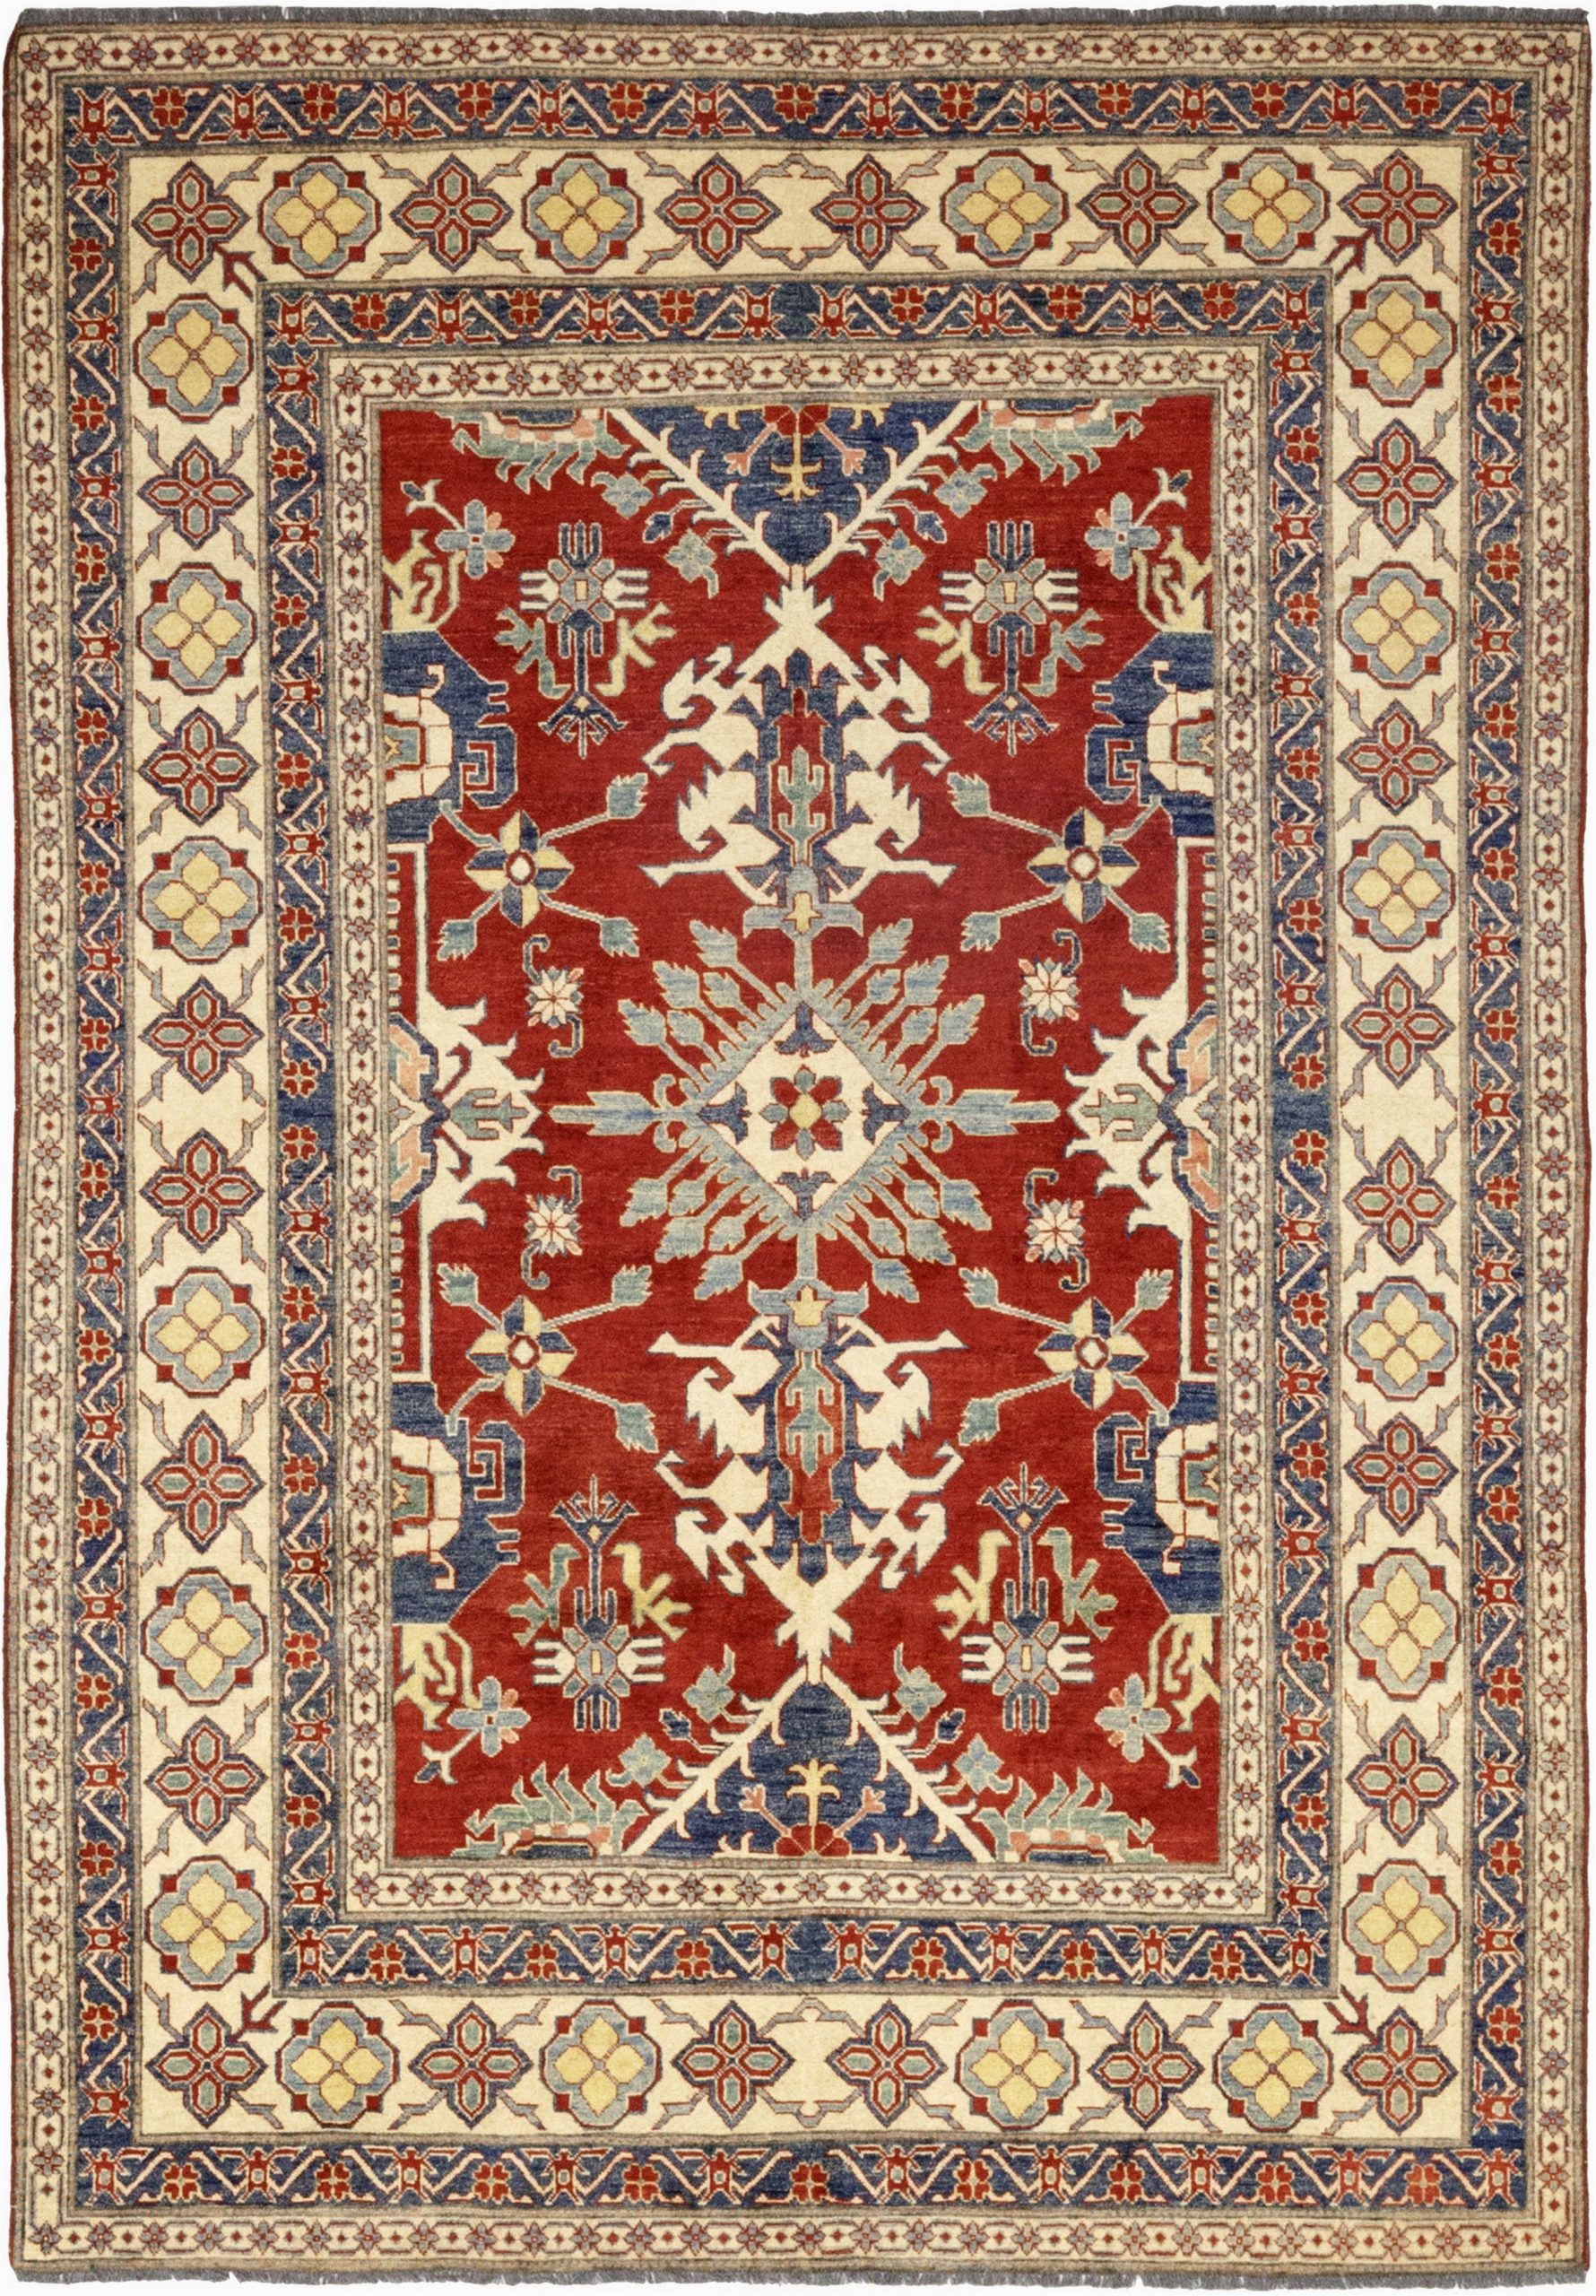 lowes area rugs clearance hand knotted kazak rectangle area rug design m1525 656 from lowes area rugs clearance